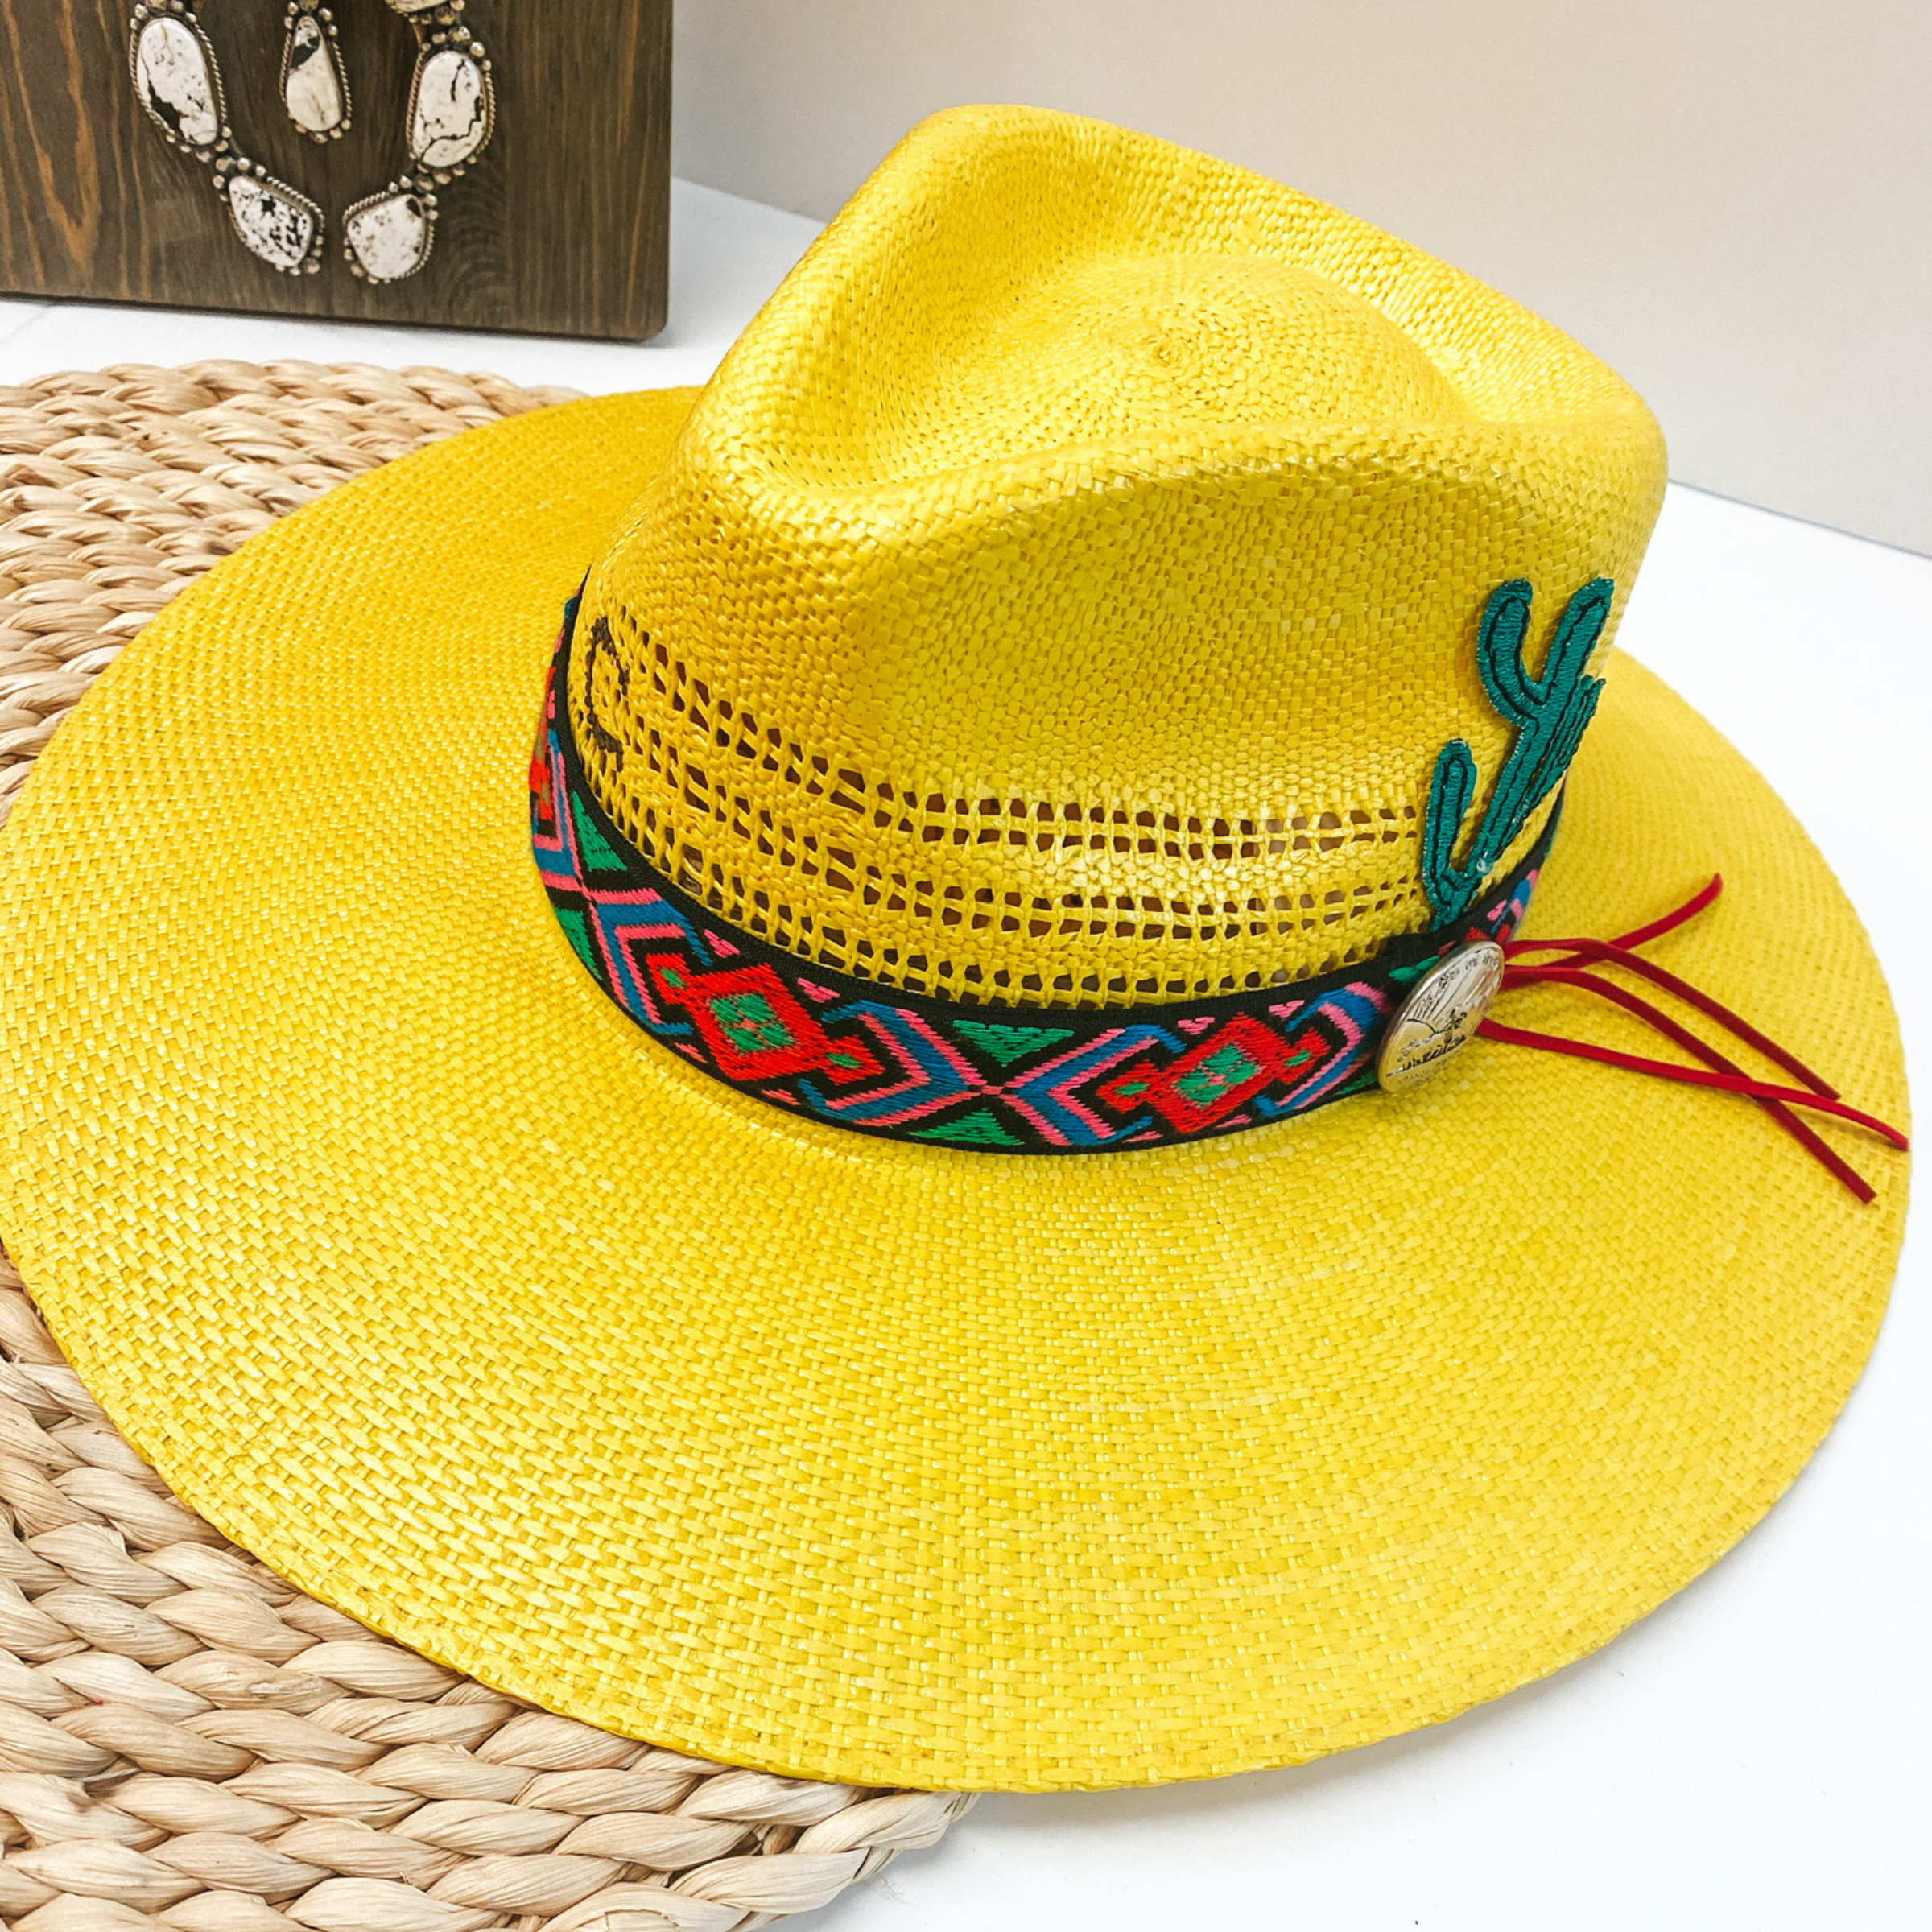 Charlie 1 Horse | Mariachi Stiff Brim Straw Hat with Colorful Design Band, Coin Pendant and Cactus Detailing - Giddy Up Glamour Boutique